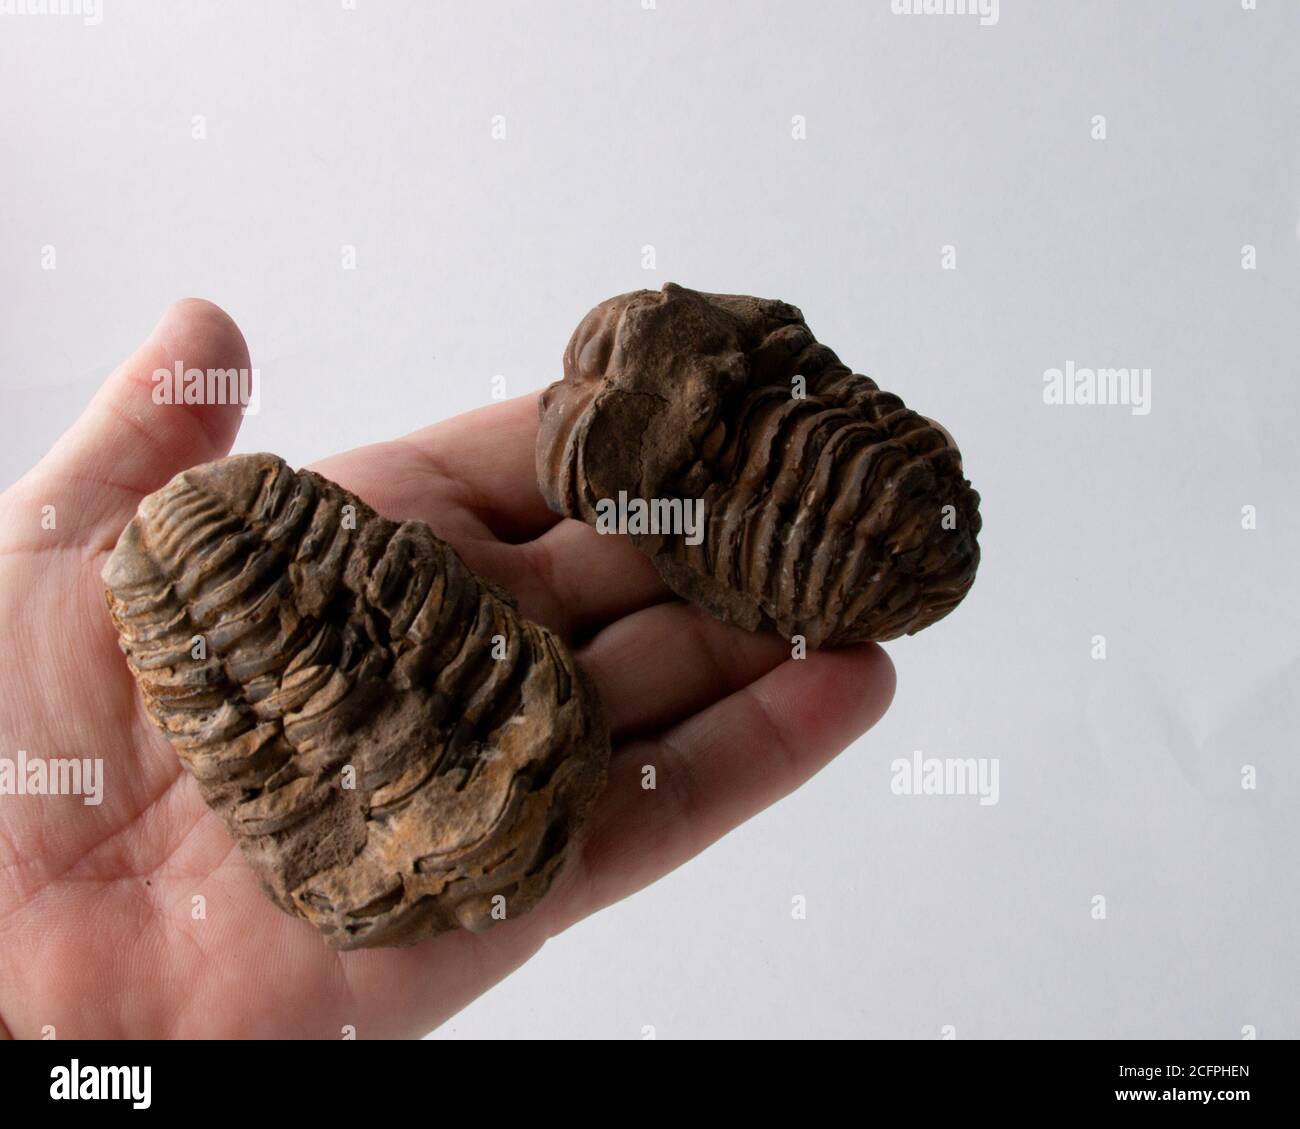 Open hand with 2 Trilobite Fossils discovered in Madgascar on white background Stock Photo